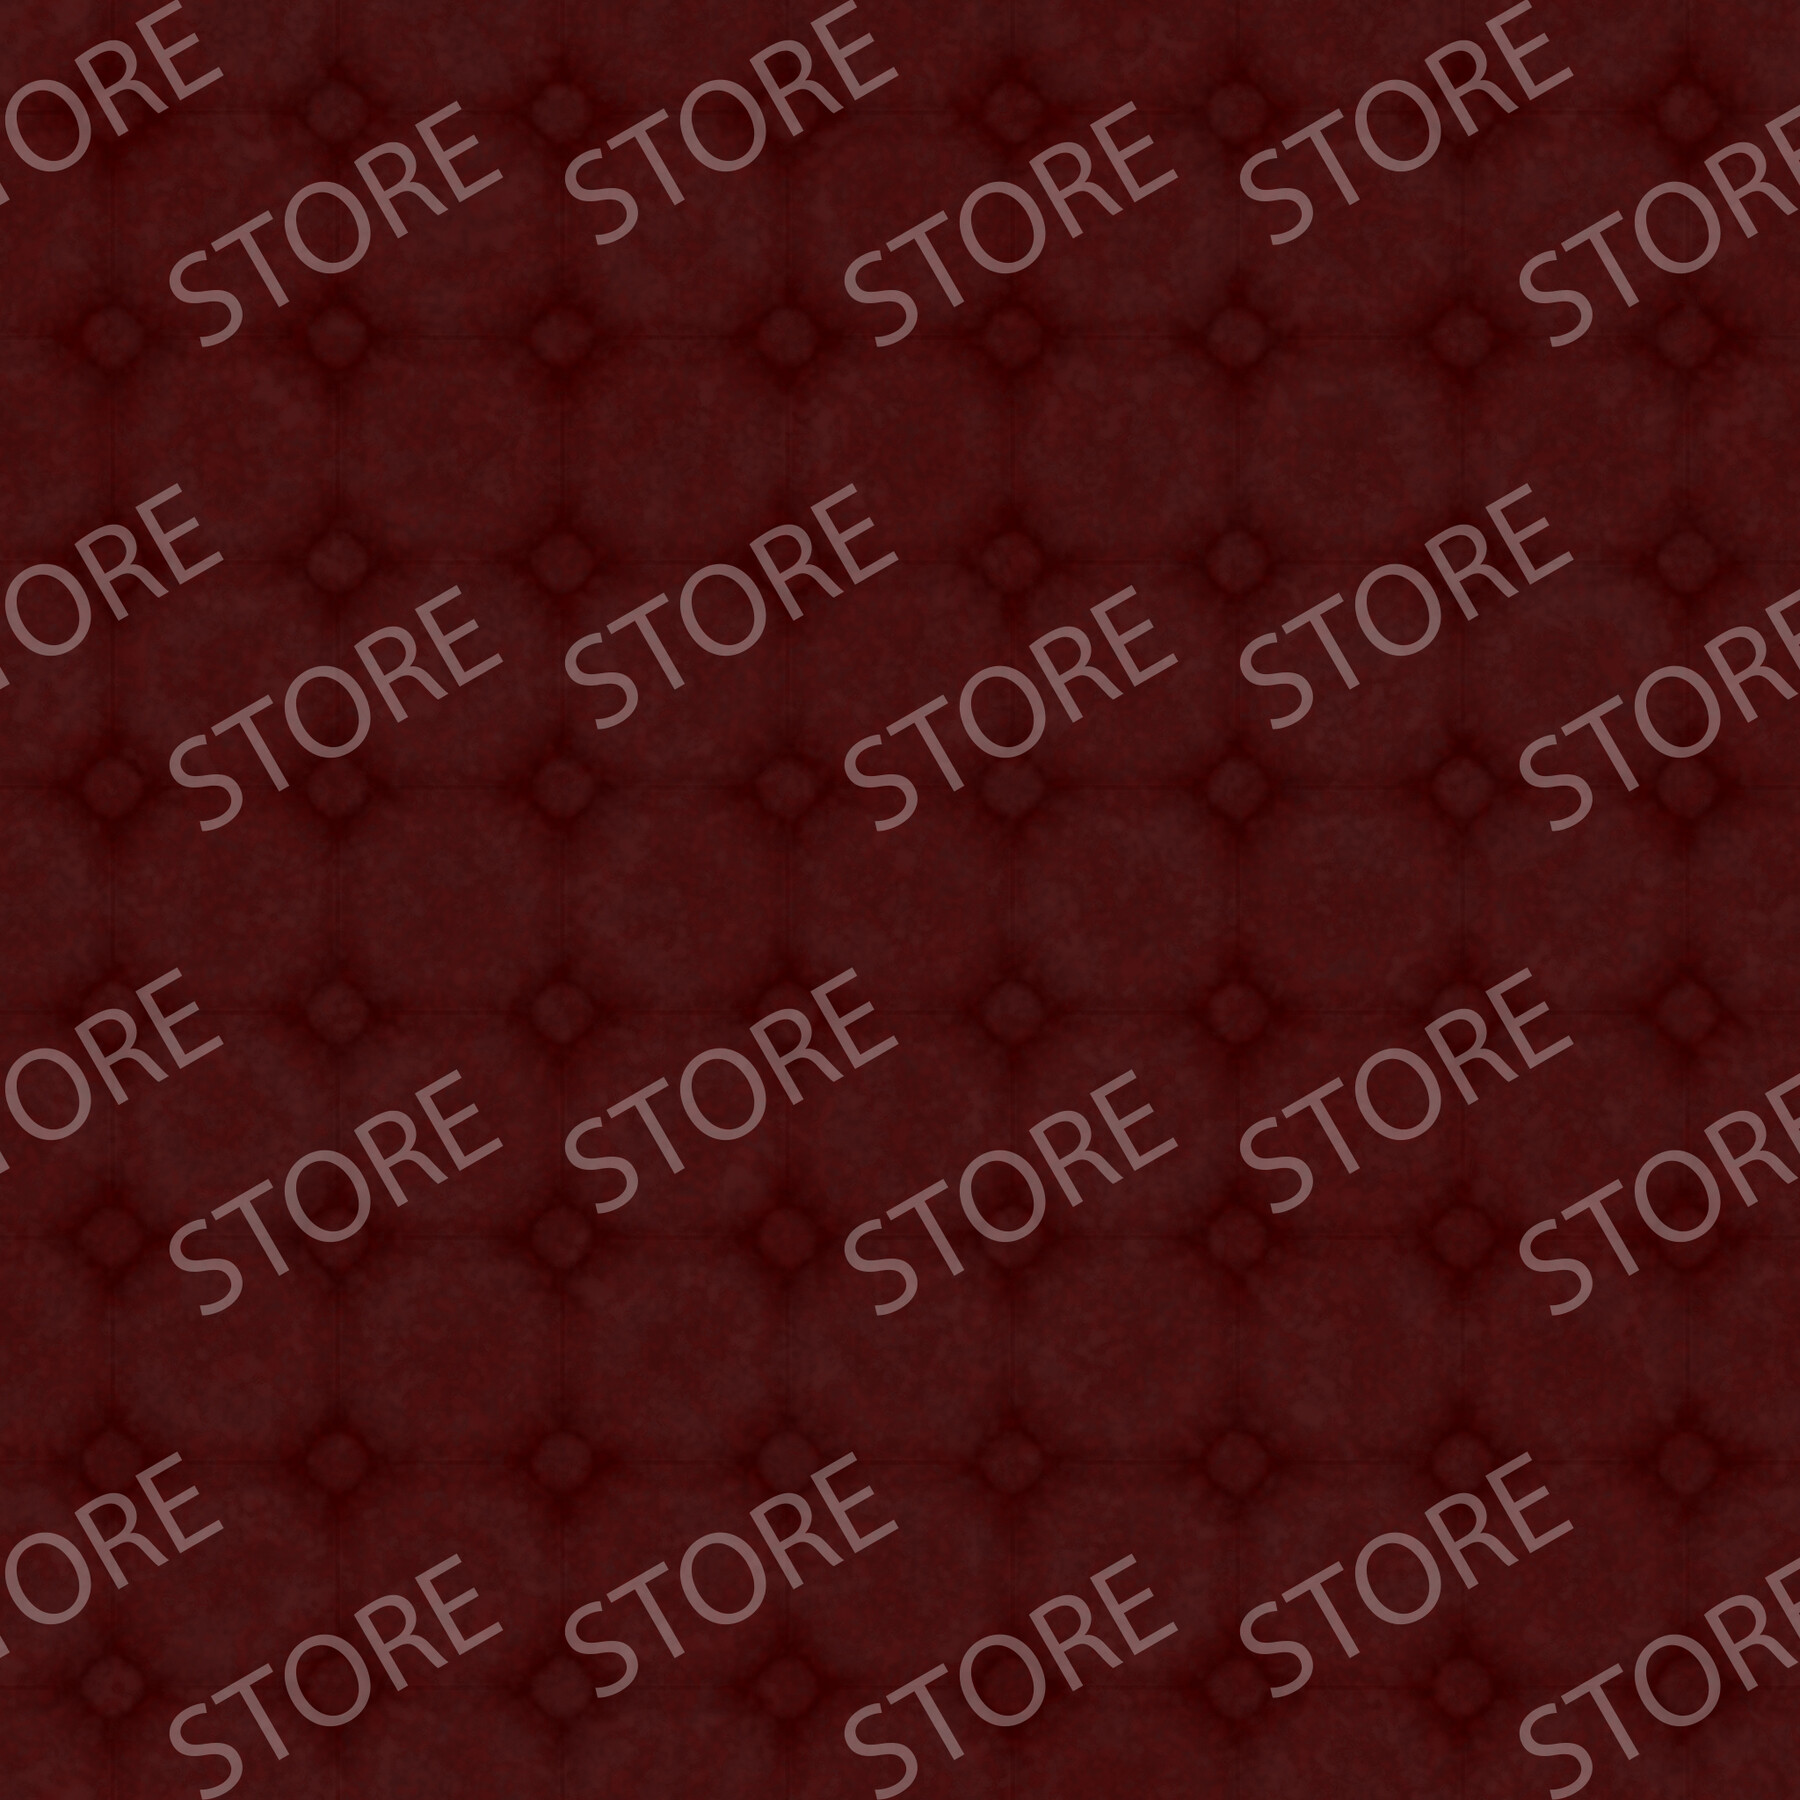 Fabric - Velvet - Red - Seamless Texture With Normalmap